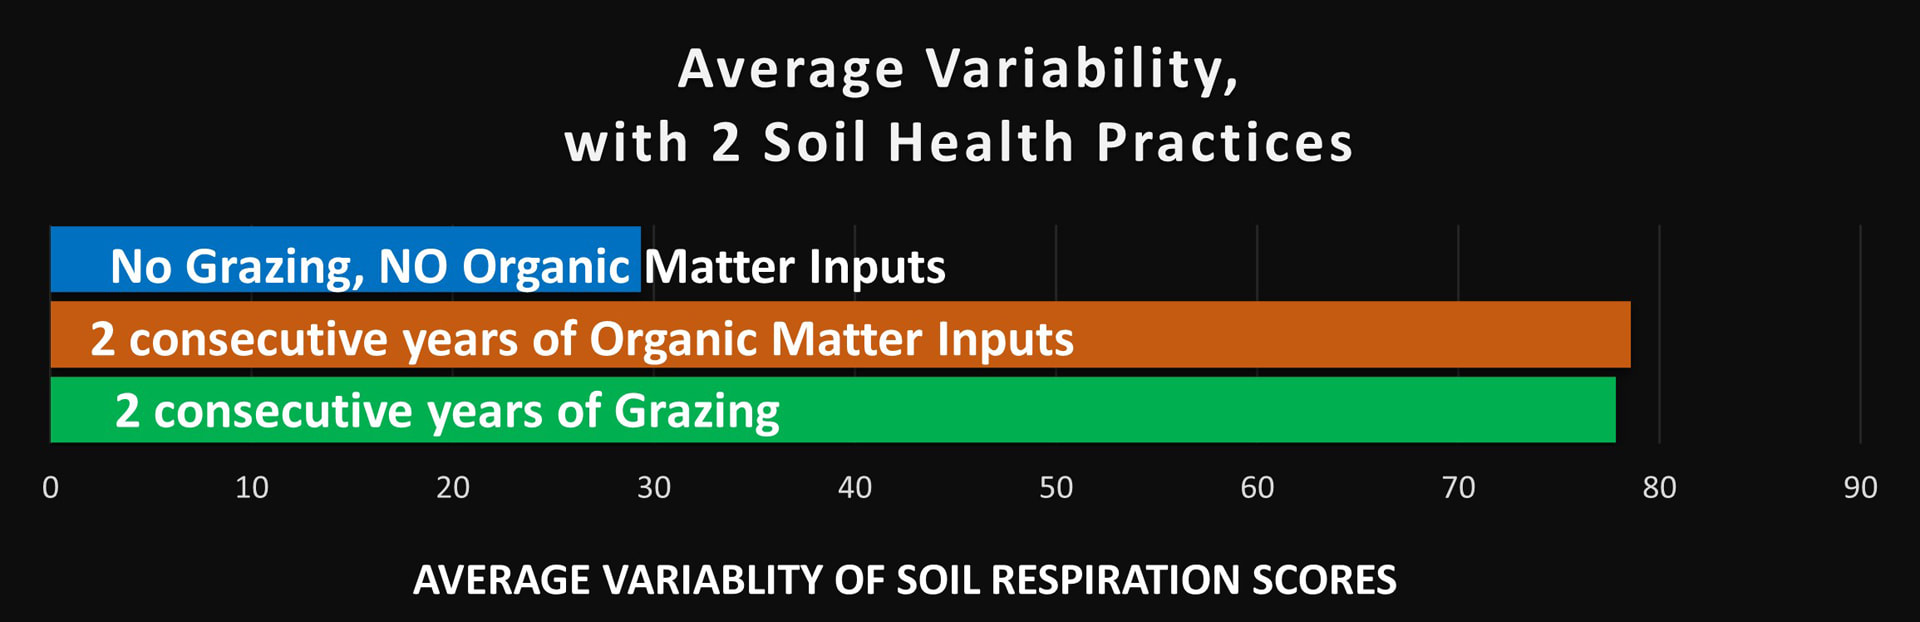 Variability with 2 Consecutive Years of Grazing or Organic Matter Inputs